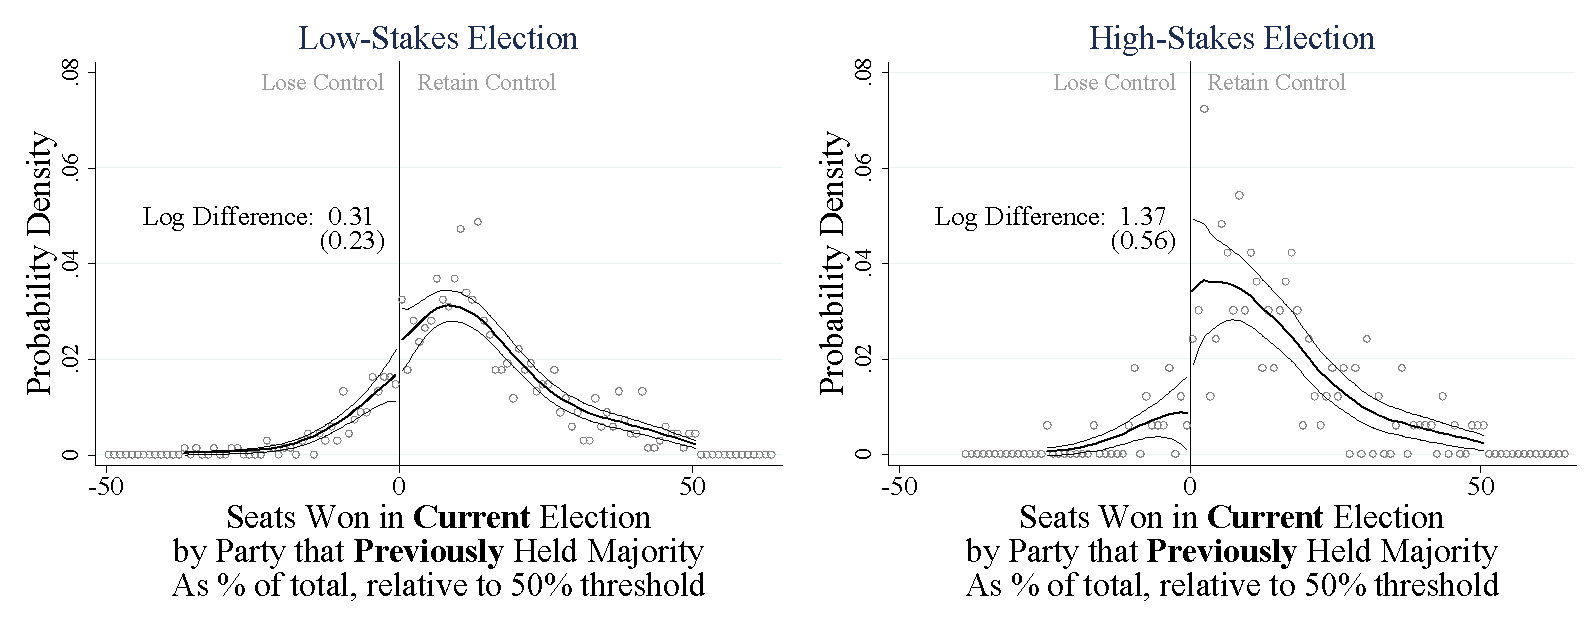 Probability Distribution: The Majority Party is Far More Likely  to Barely Win than Barely Lose a High-Stakes Election